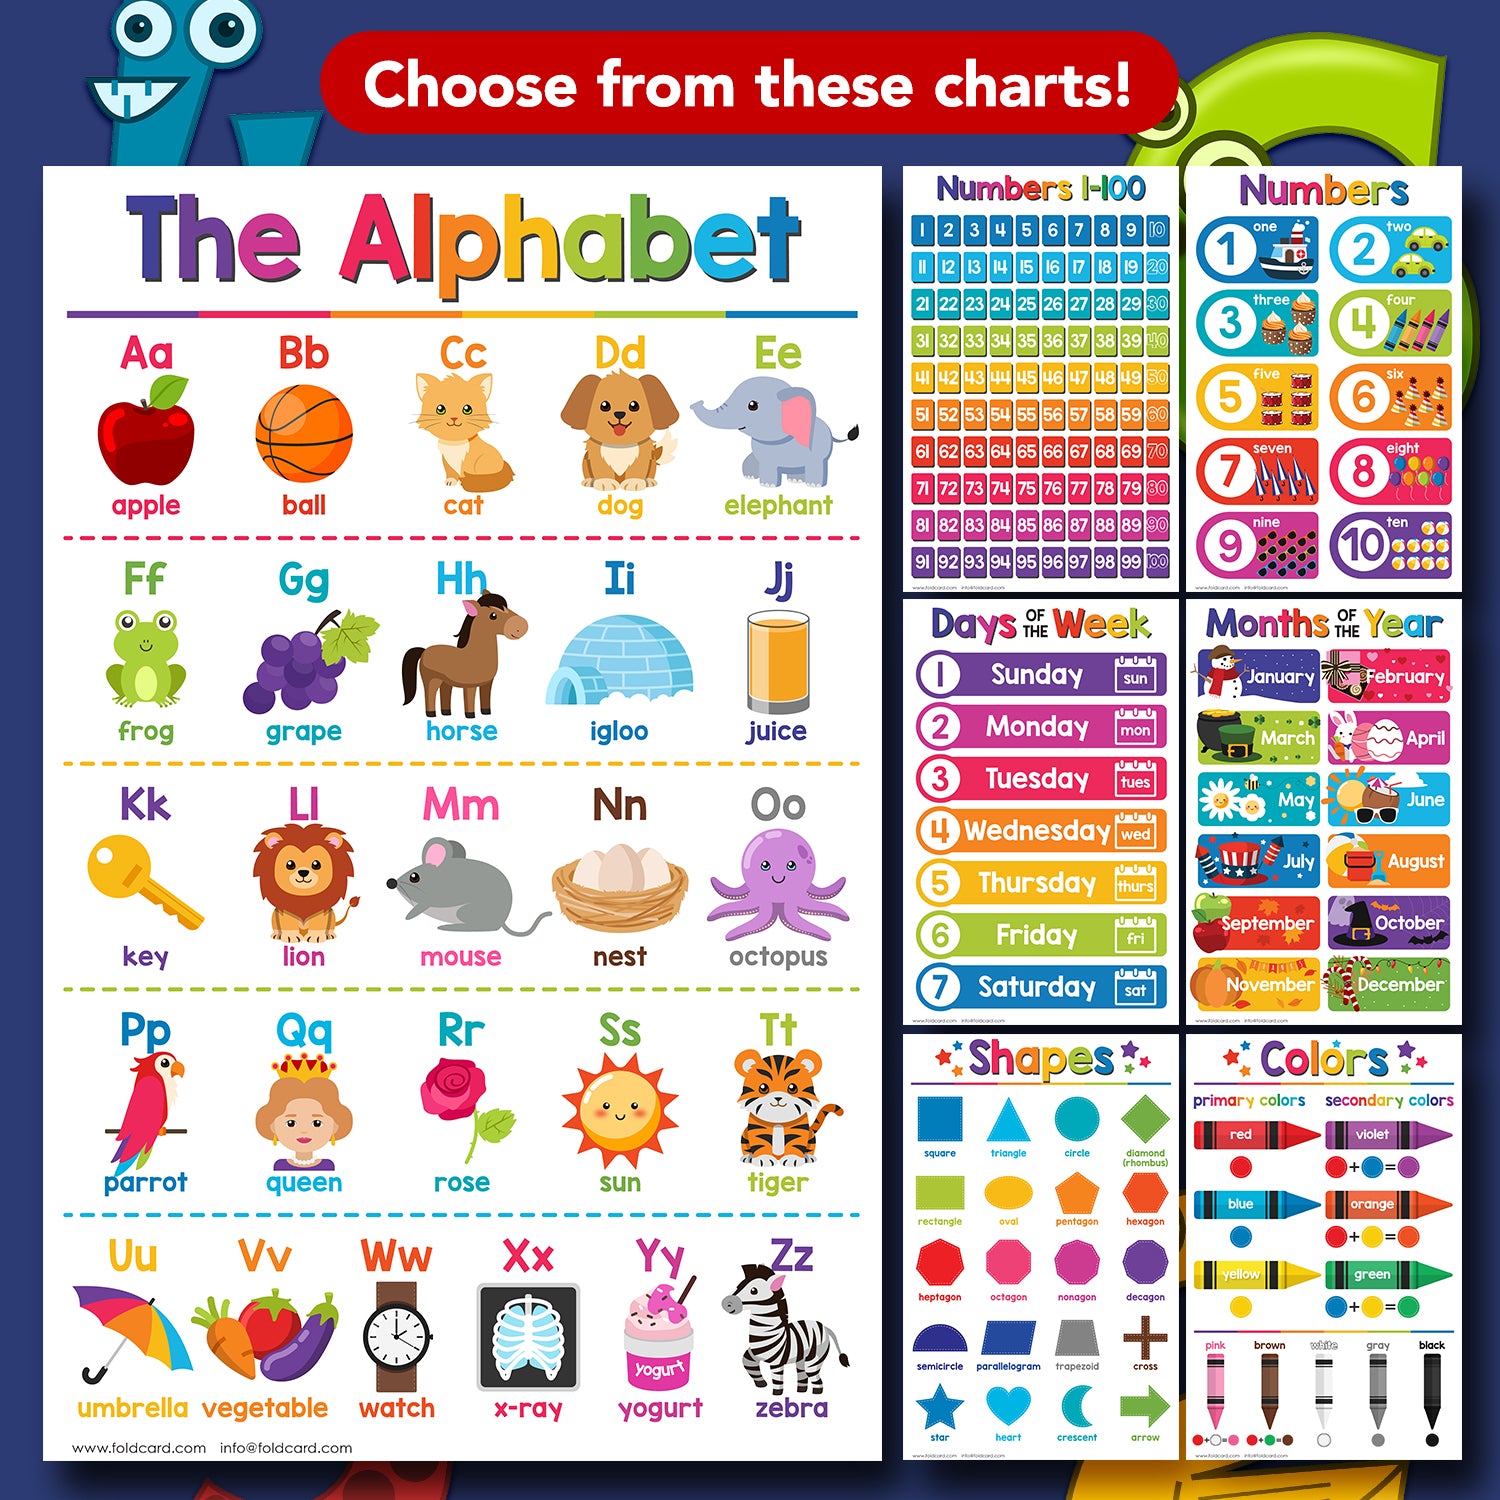 Multiplication Chart Math Table Poster - 11" x 17" Educational Visual for Learning | 5-Pack